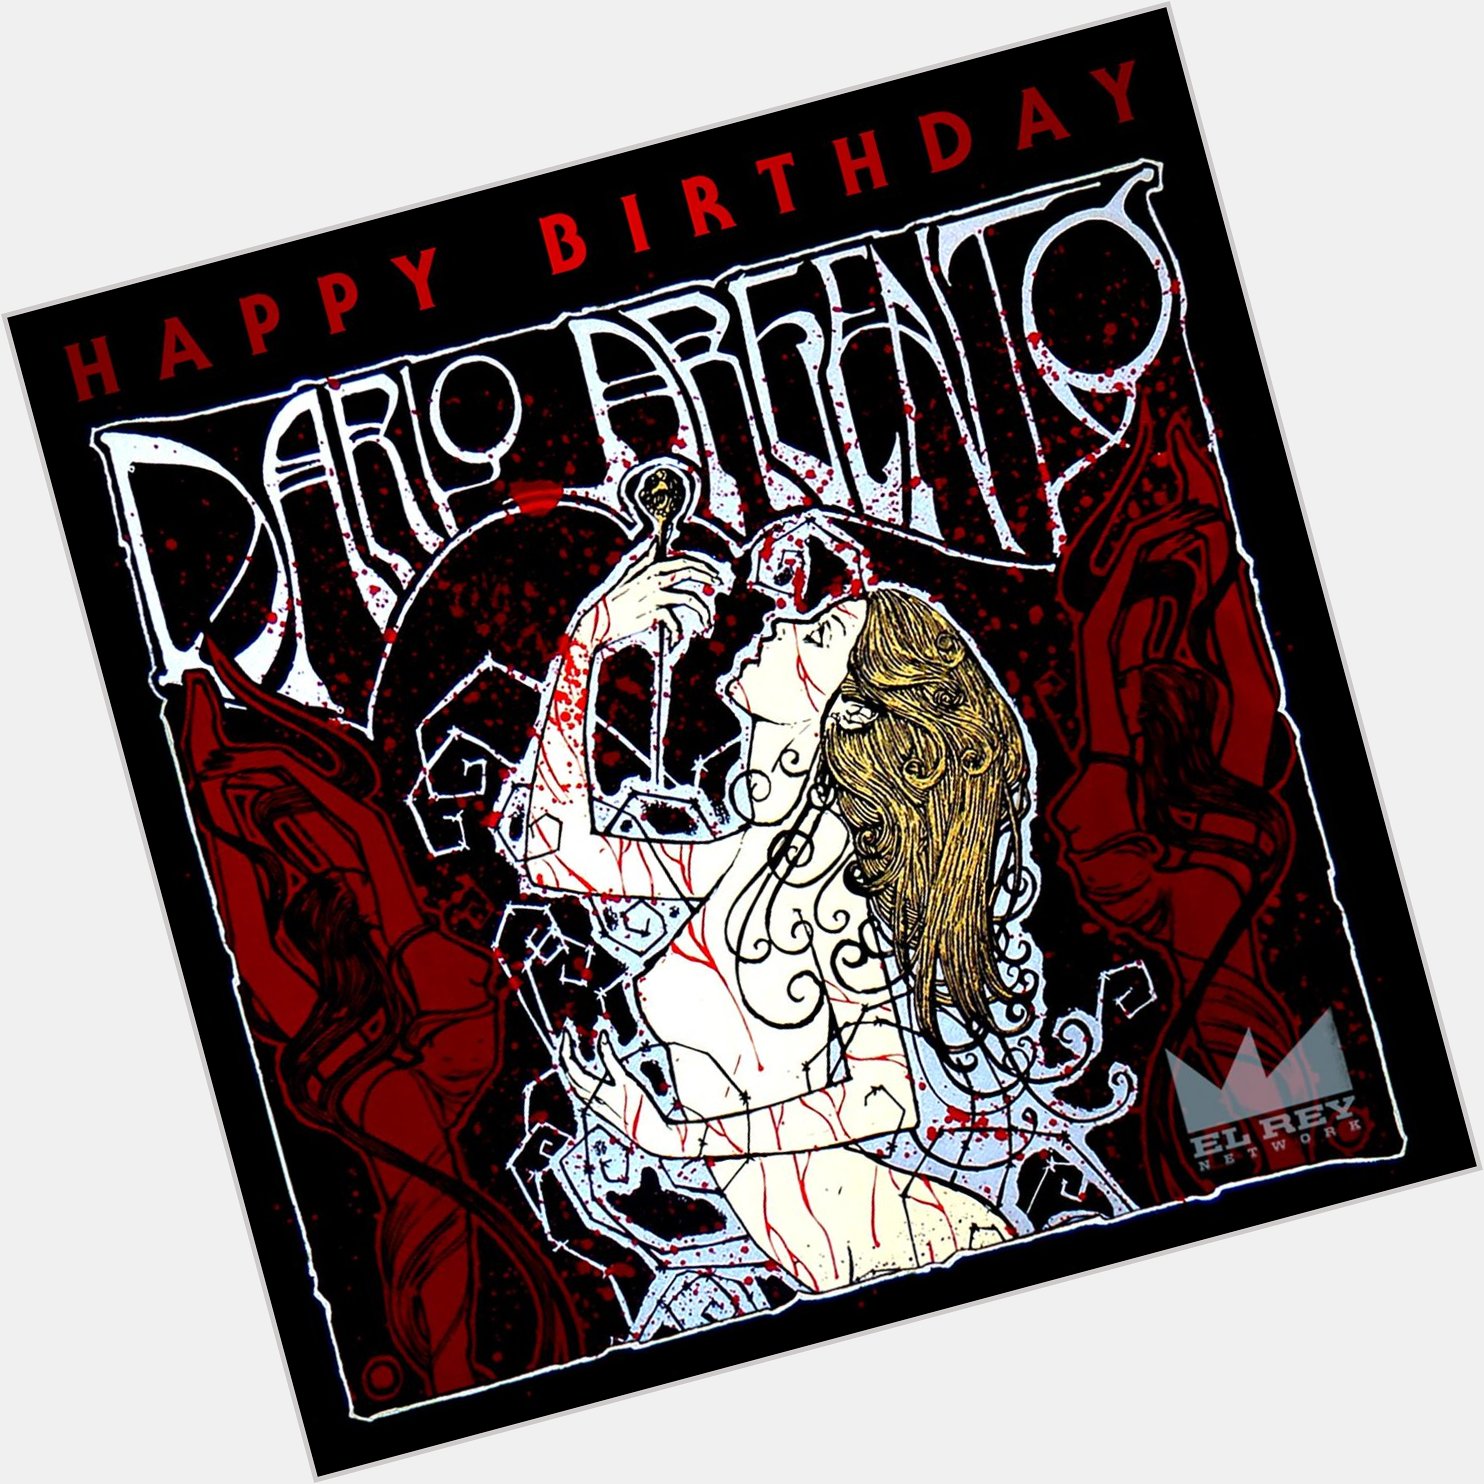 Happy birthday to living Giallo legend, Dario Argento, who turns 75 today!
(Art by Maellus) 

